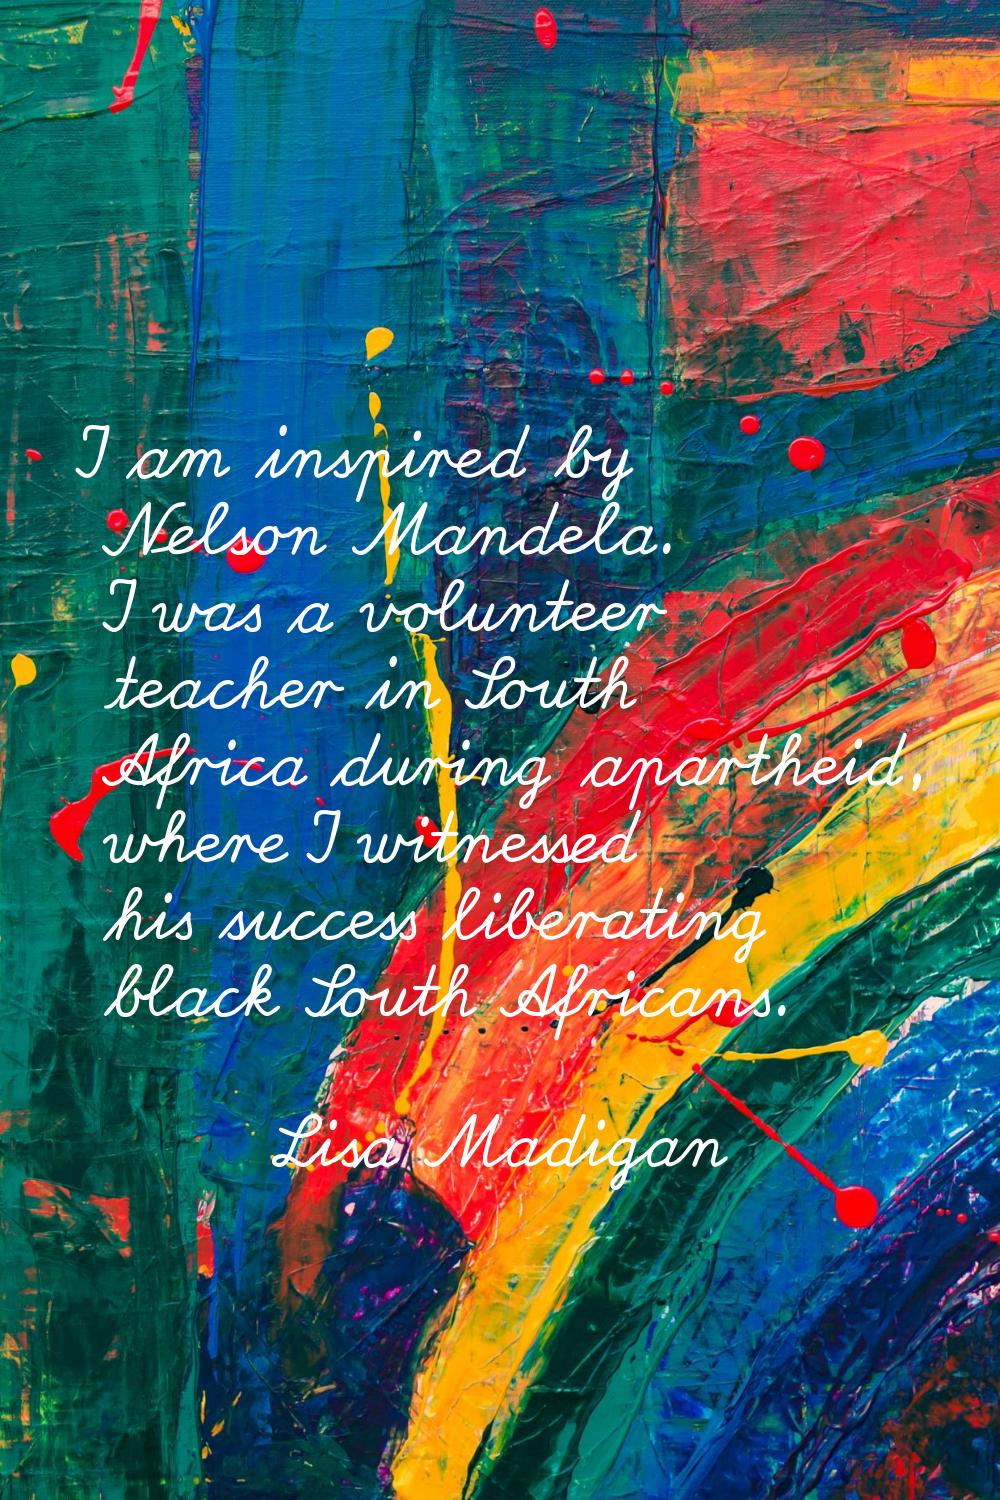 I am inspired by Nelson Mandela. I was a volunteer teacher in South Africa during apartheid, where 